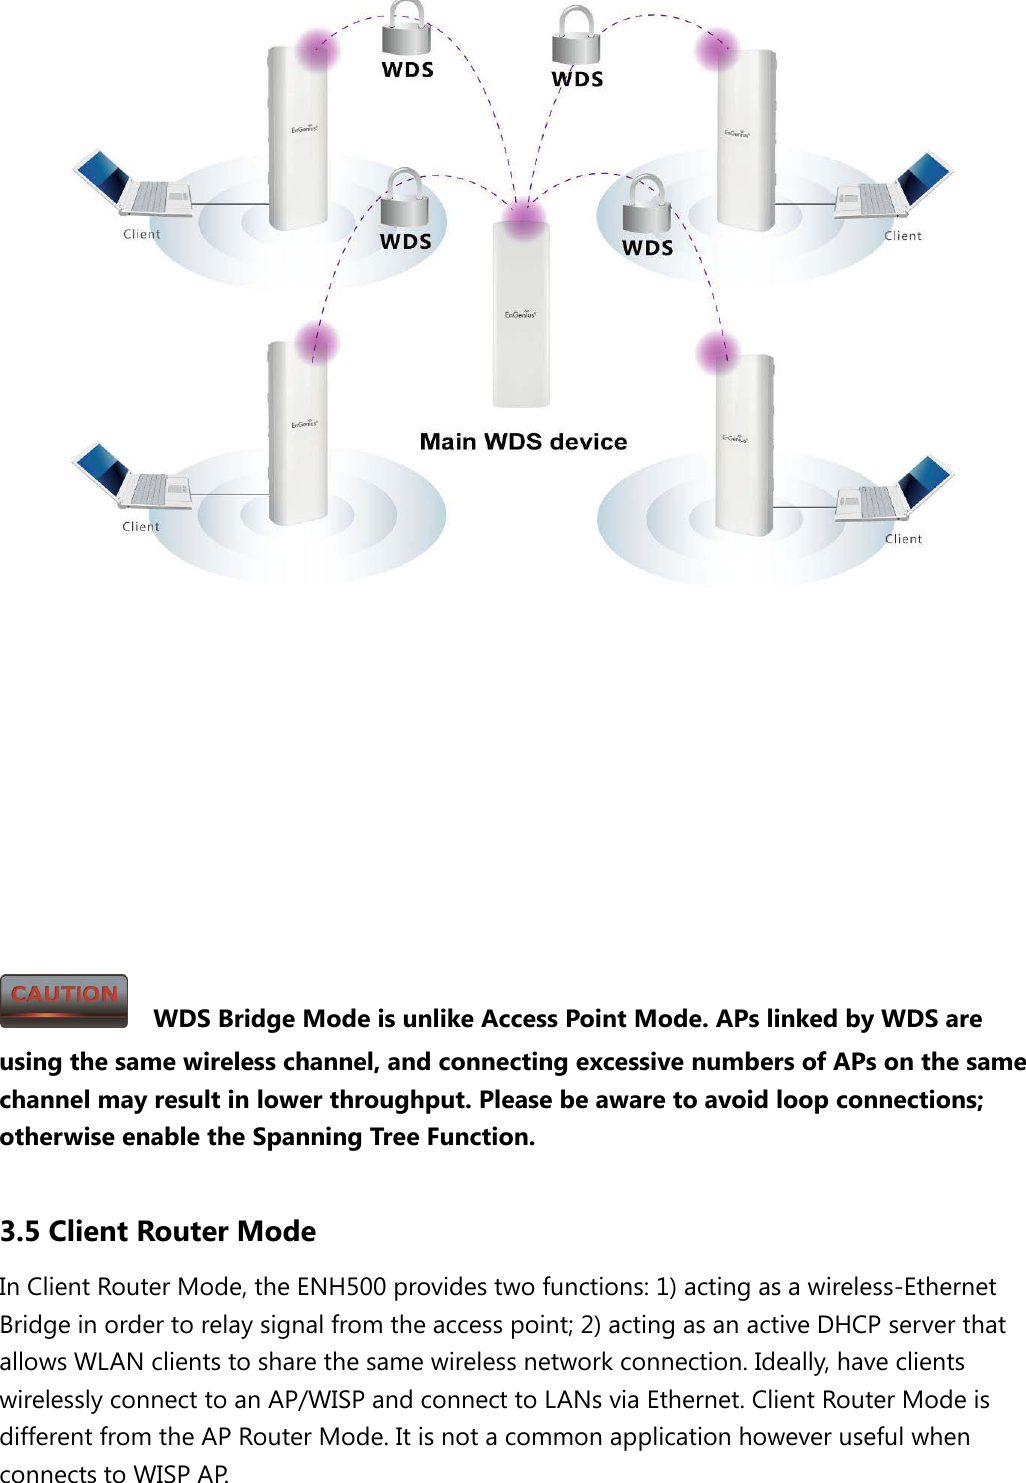              WDS Bridge Mode is unlike Access Point Mode. APs linked by WDS are using the same wireless channel, and connecting excessive numbers of APs on the same channel may result in lower throughput. Please be aware to avoid loop connections; otherwise enable the Spanning Tree Function.  3.5 Client Router Mode In Client Router Mode, the ENH500 provides two functions: 1) acting as a wireless-Ethernet Bridge in order to relay signal from the access point; 2) acting as an active DHCP server that allows WLAN clients to share the same wireless network connection. Ideally, have clients wirelessly connect to an AP/WISP and connect to LANs via Ethernet. Client Router Mode is different from the AP Router Mode. It is not a common application however useful when connects to WISP AP.  